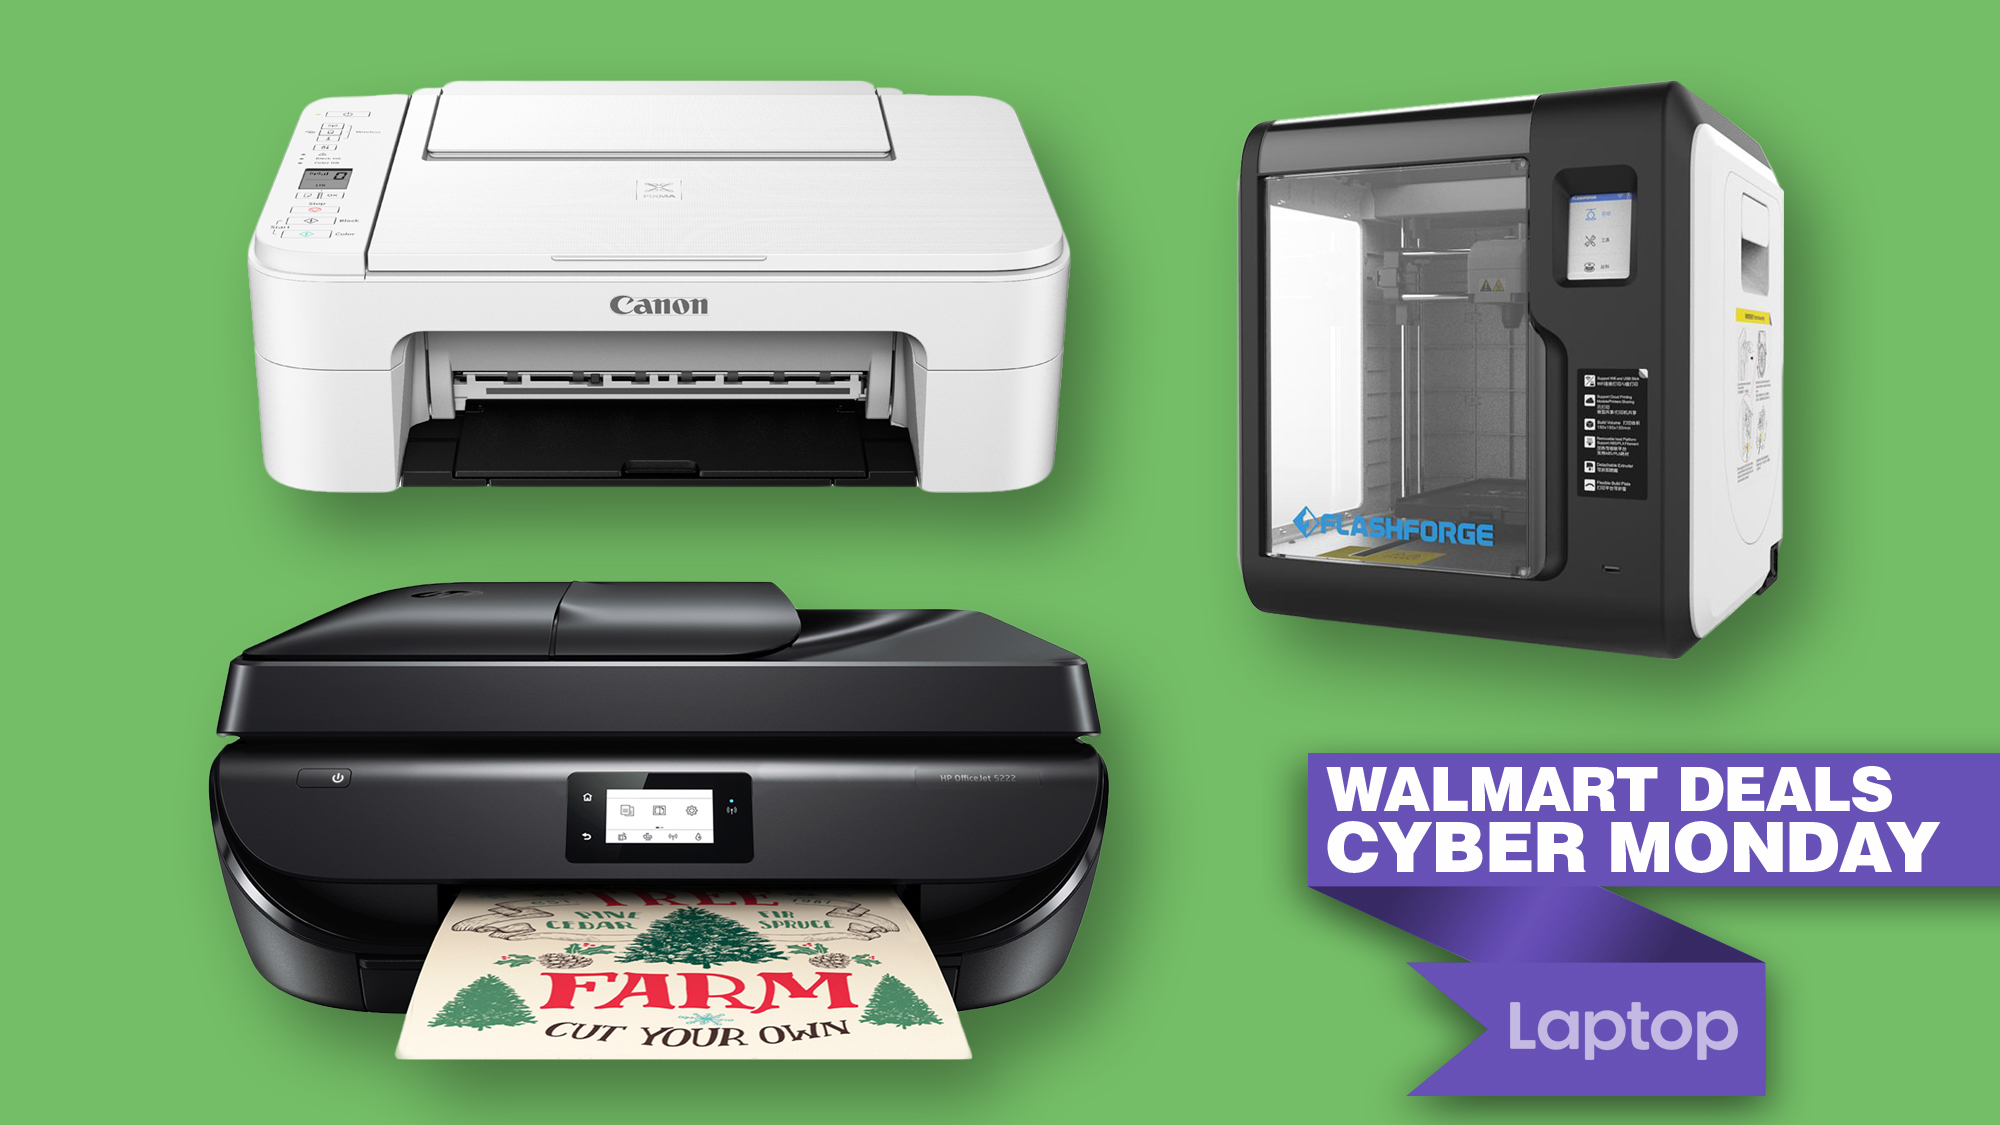 solo nitrogen violinist Best After Cyber Monday printer deals are at Walmart — Save up to 59% on  HP, Canon and more | Laptop Mag